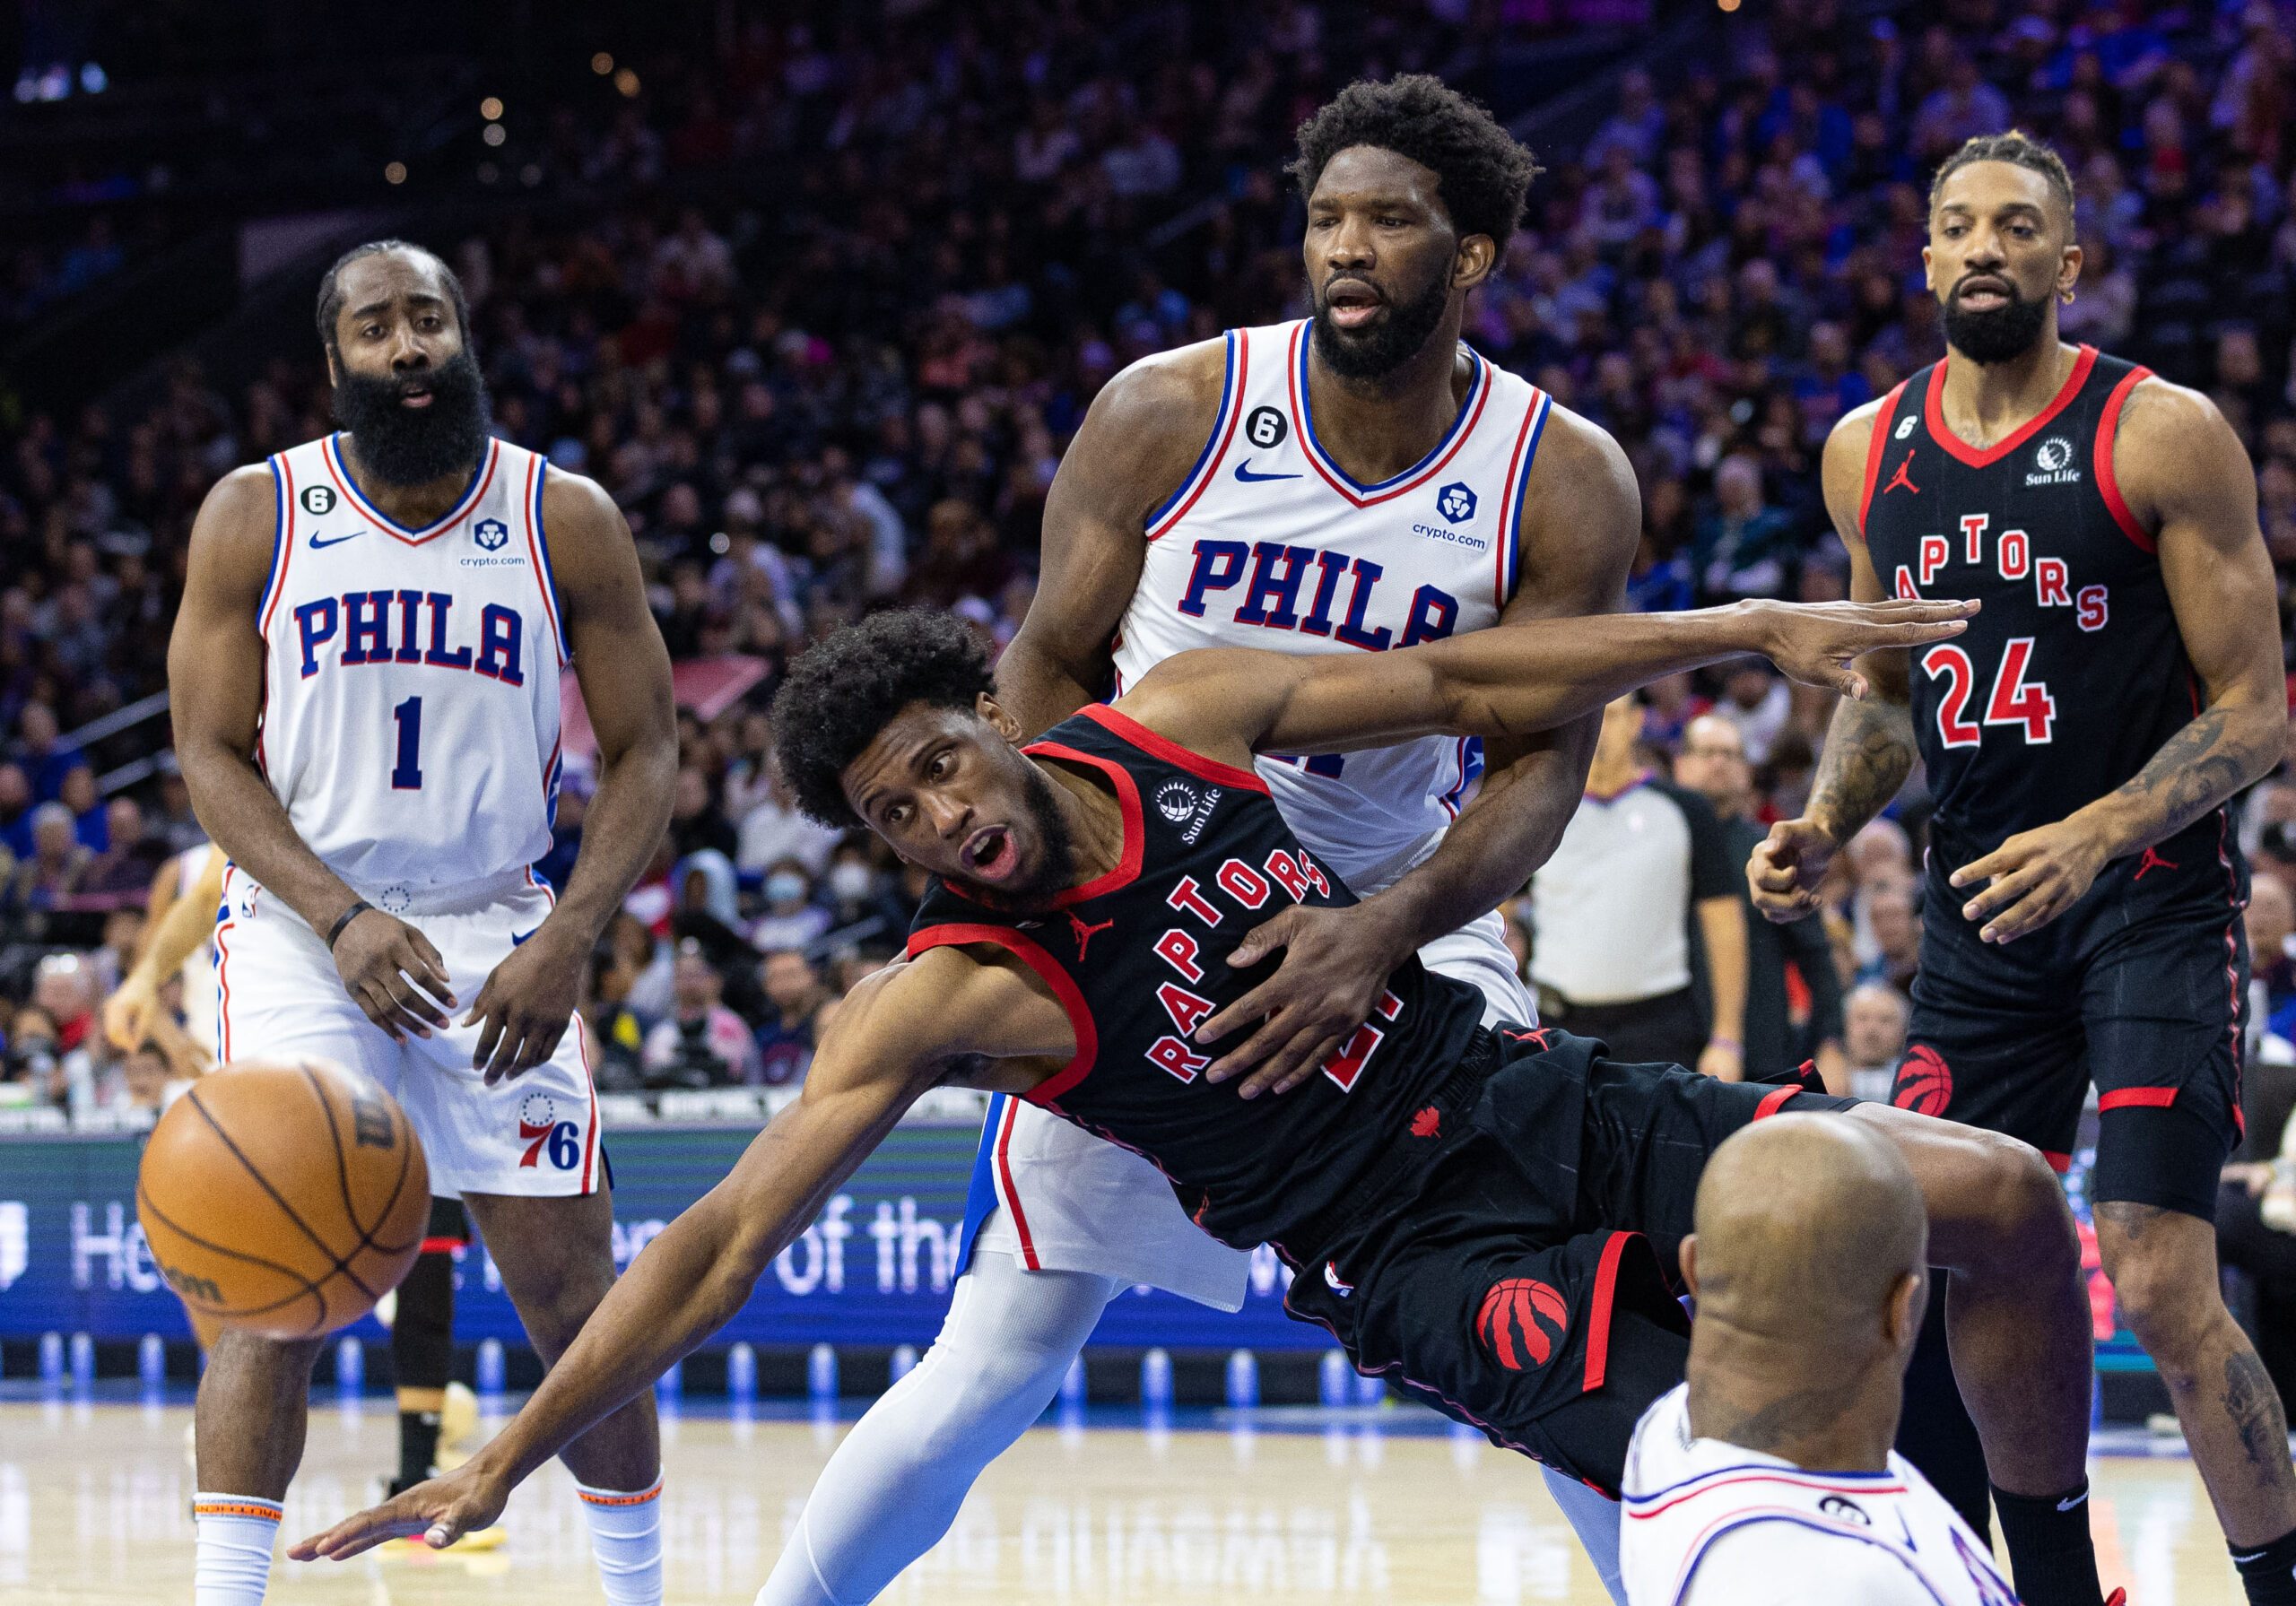 Sixers stay hot, earn OT escape thriller over Raptors